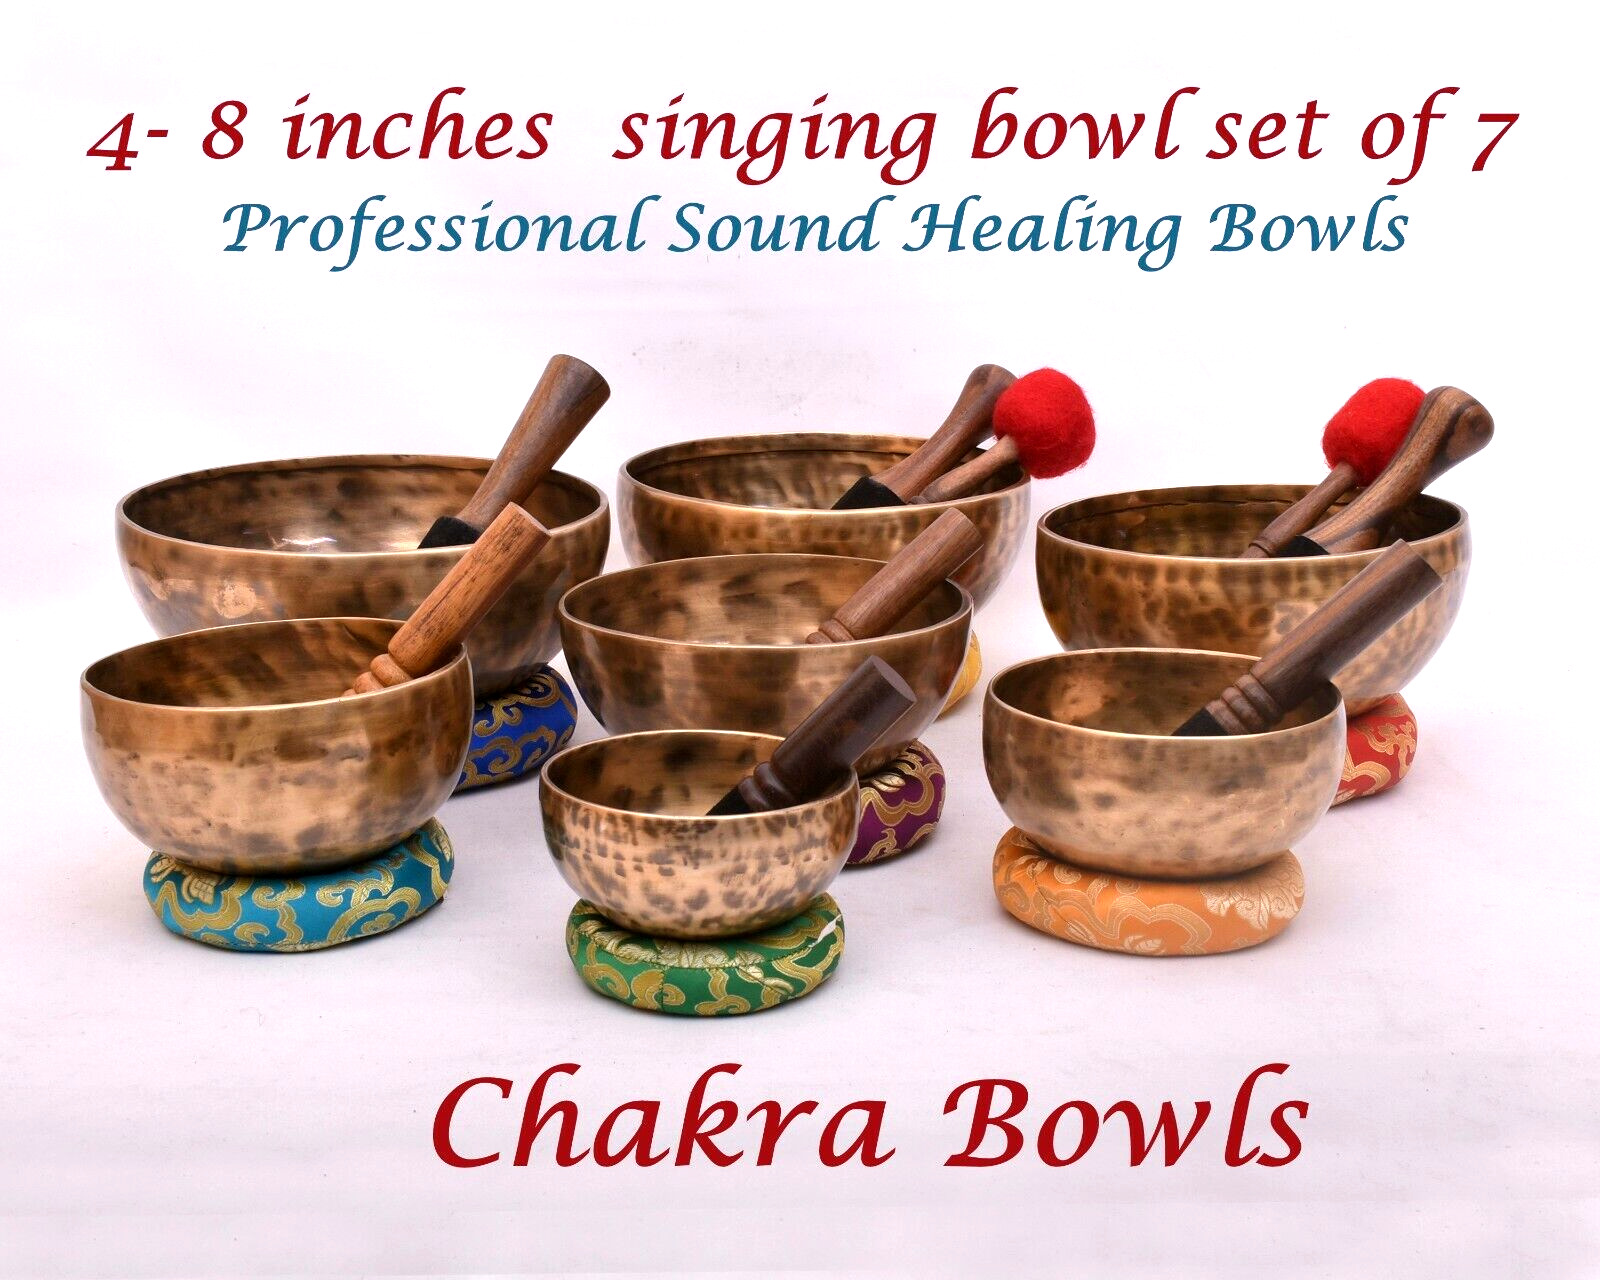 4-8 inches Chakra frequency tuned singing bowl set of 7 - Tibetan Singing bowls